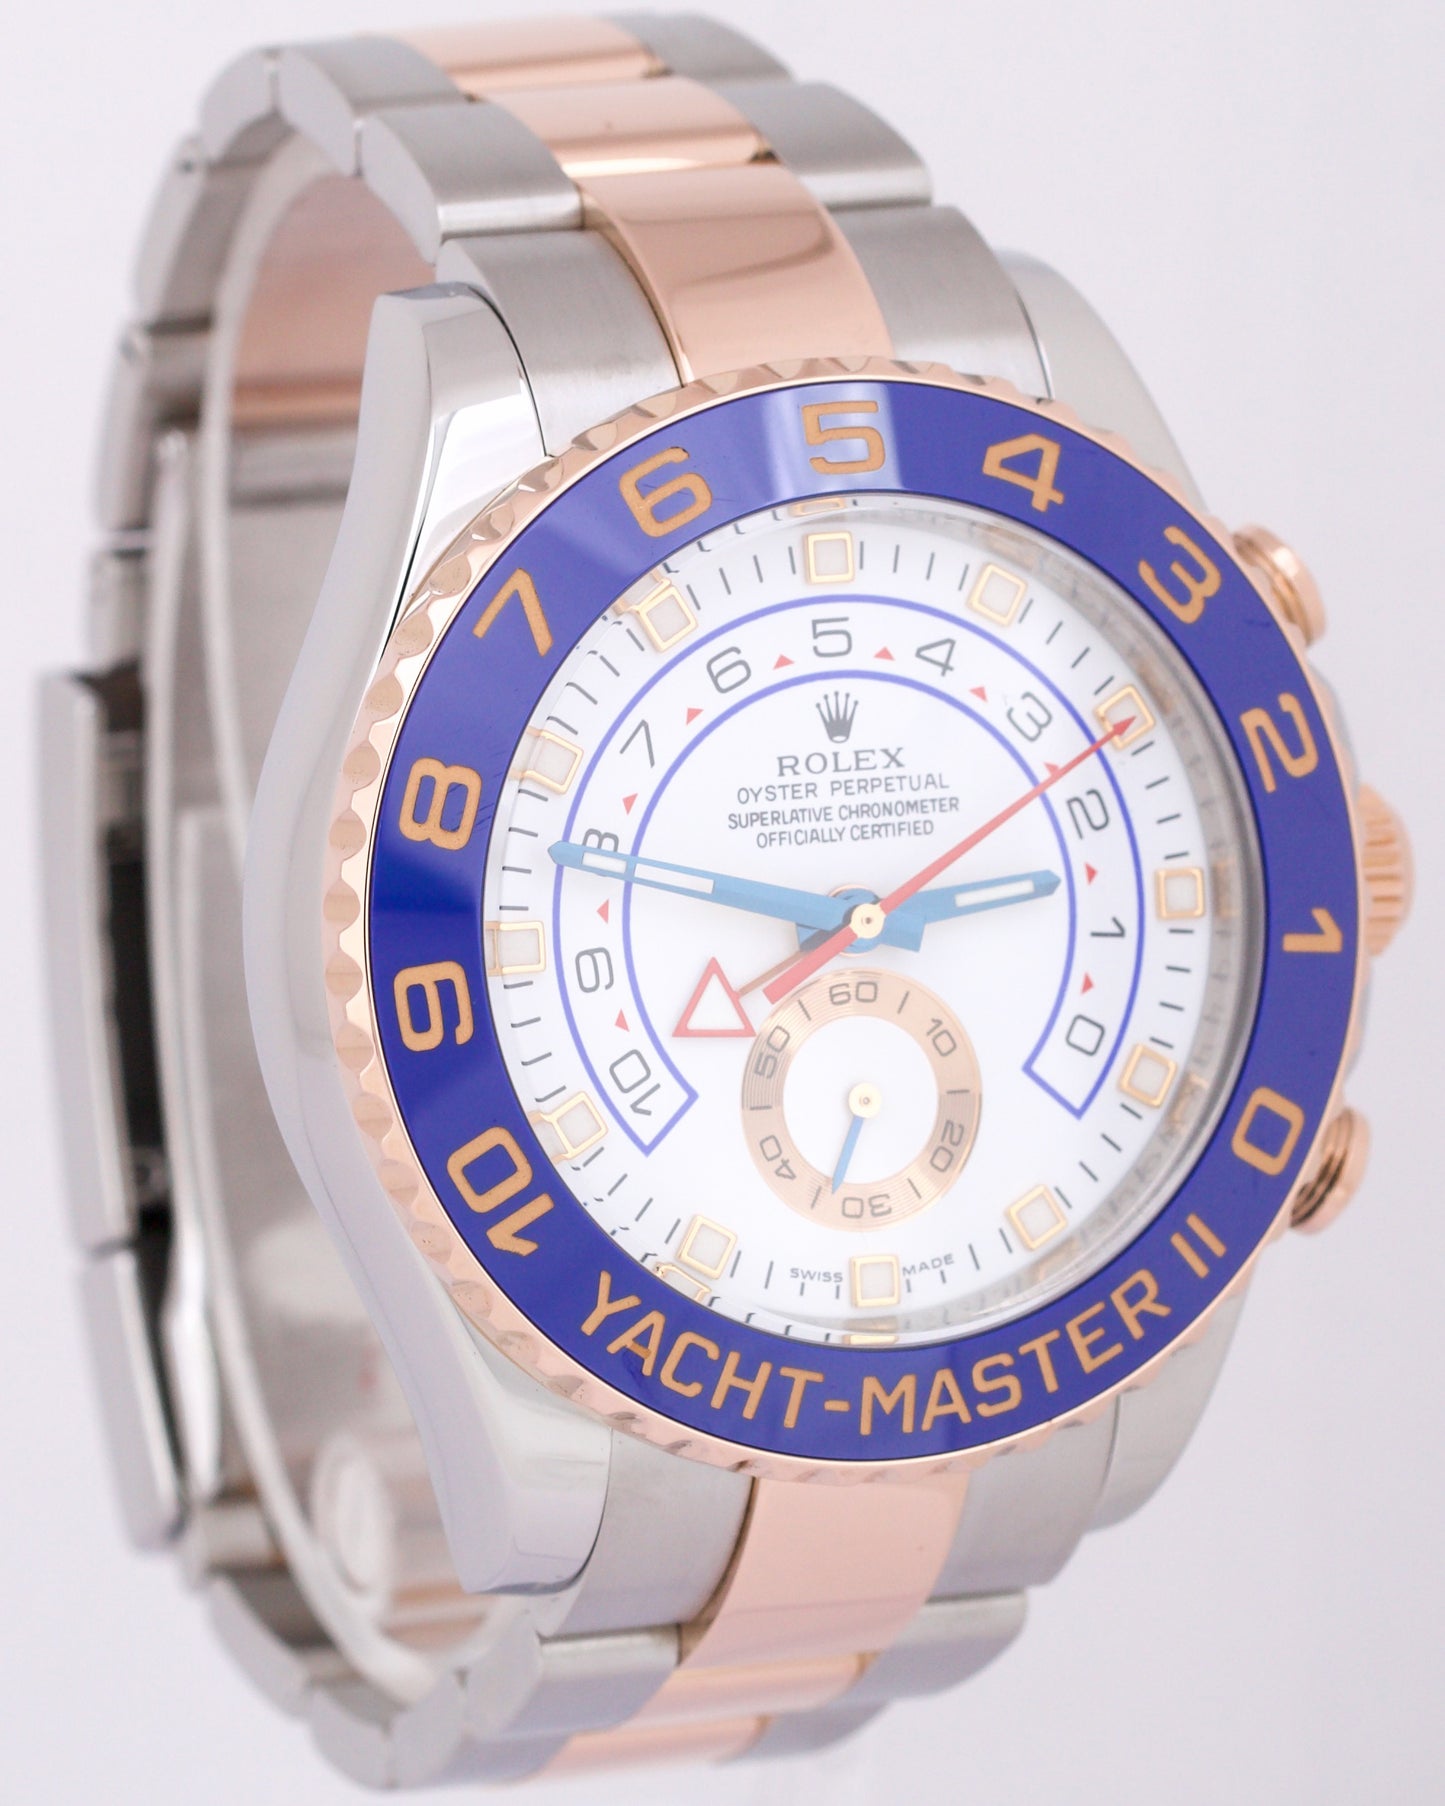 Rolex Yacht-Master II White Two-Tone BLUE HANDS 18K Rose Gold Steel 44mm 116681